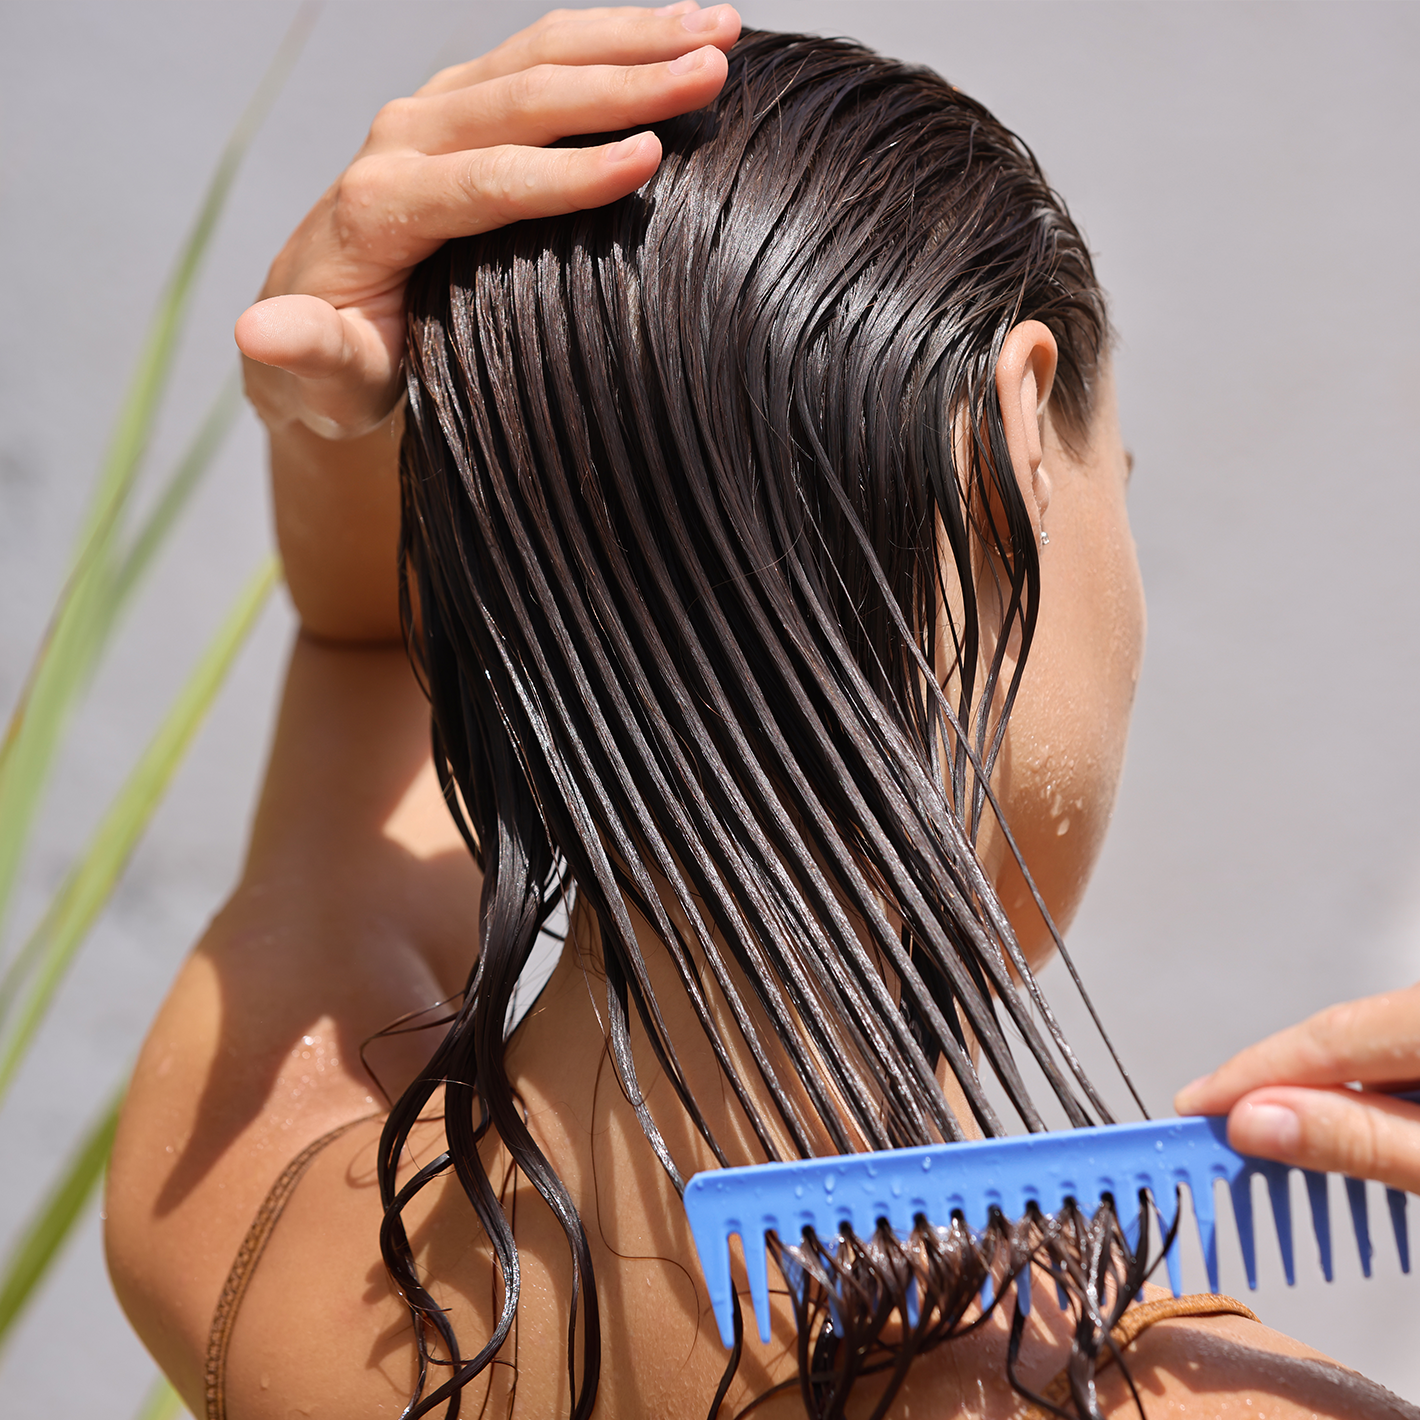 A woman combing her wet hair.